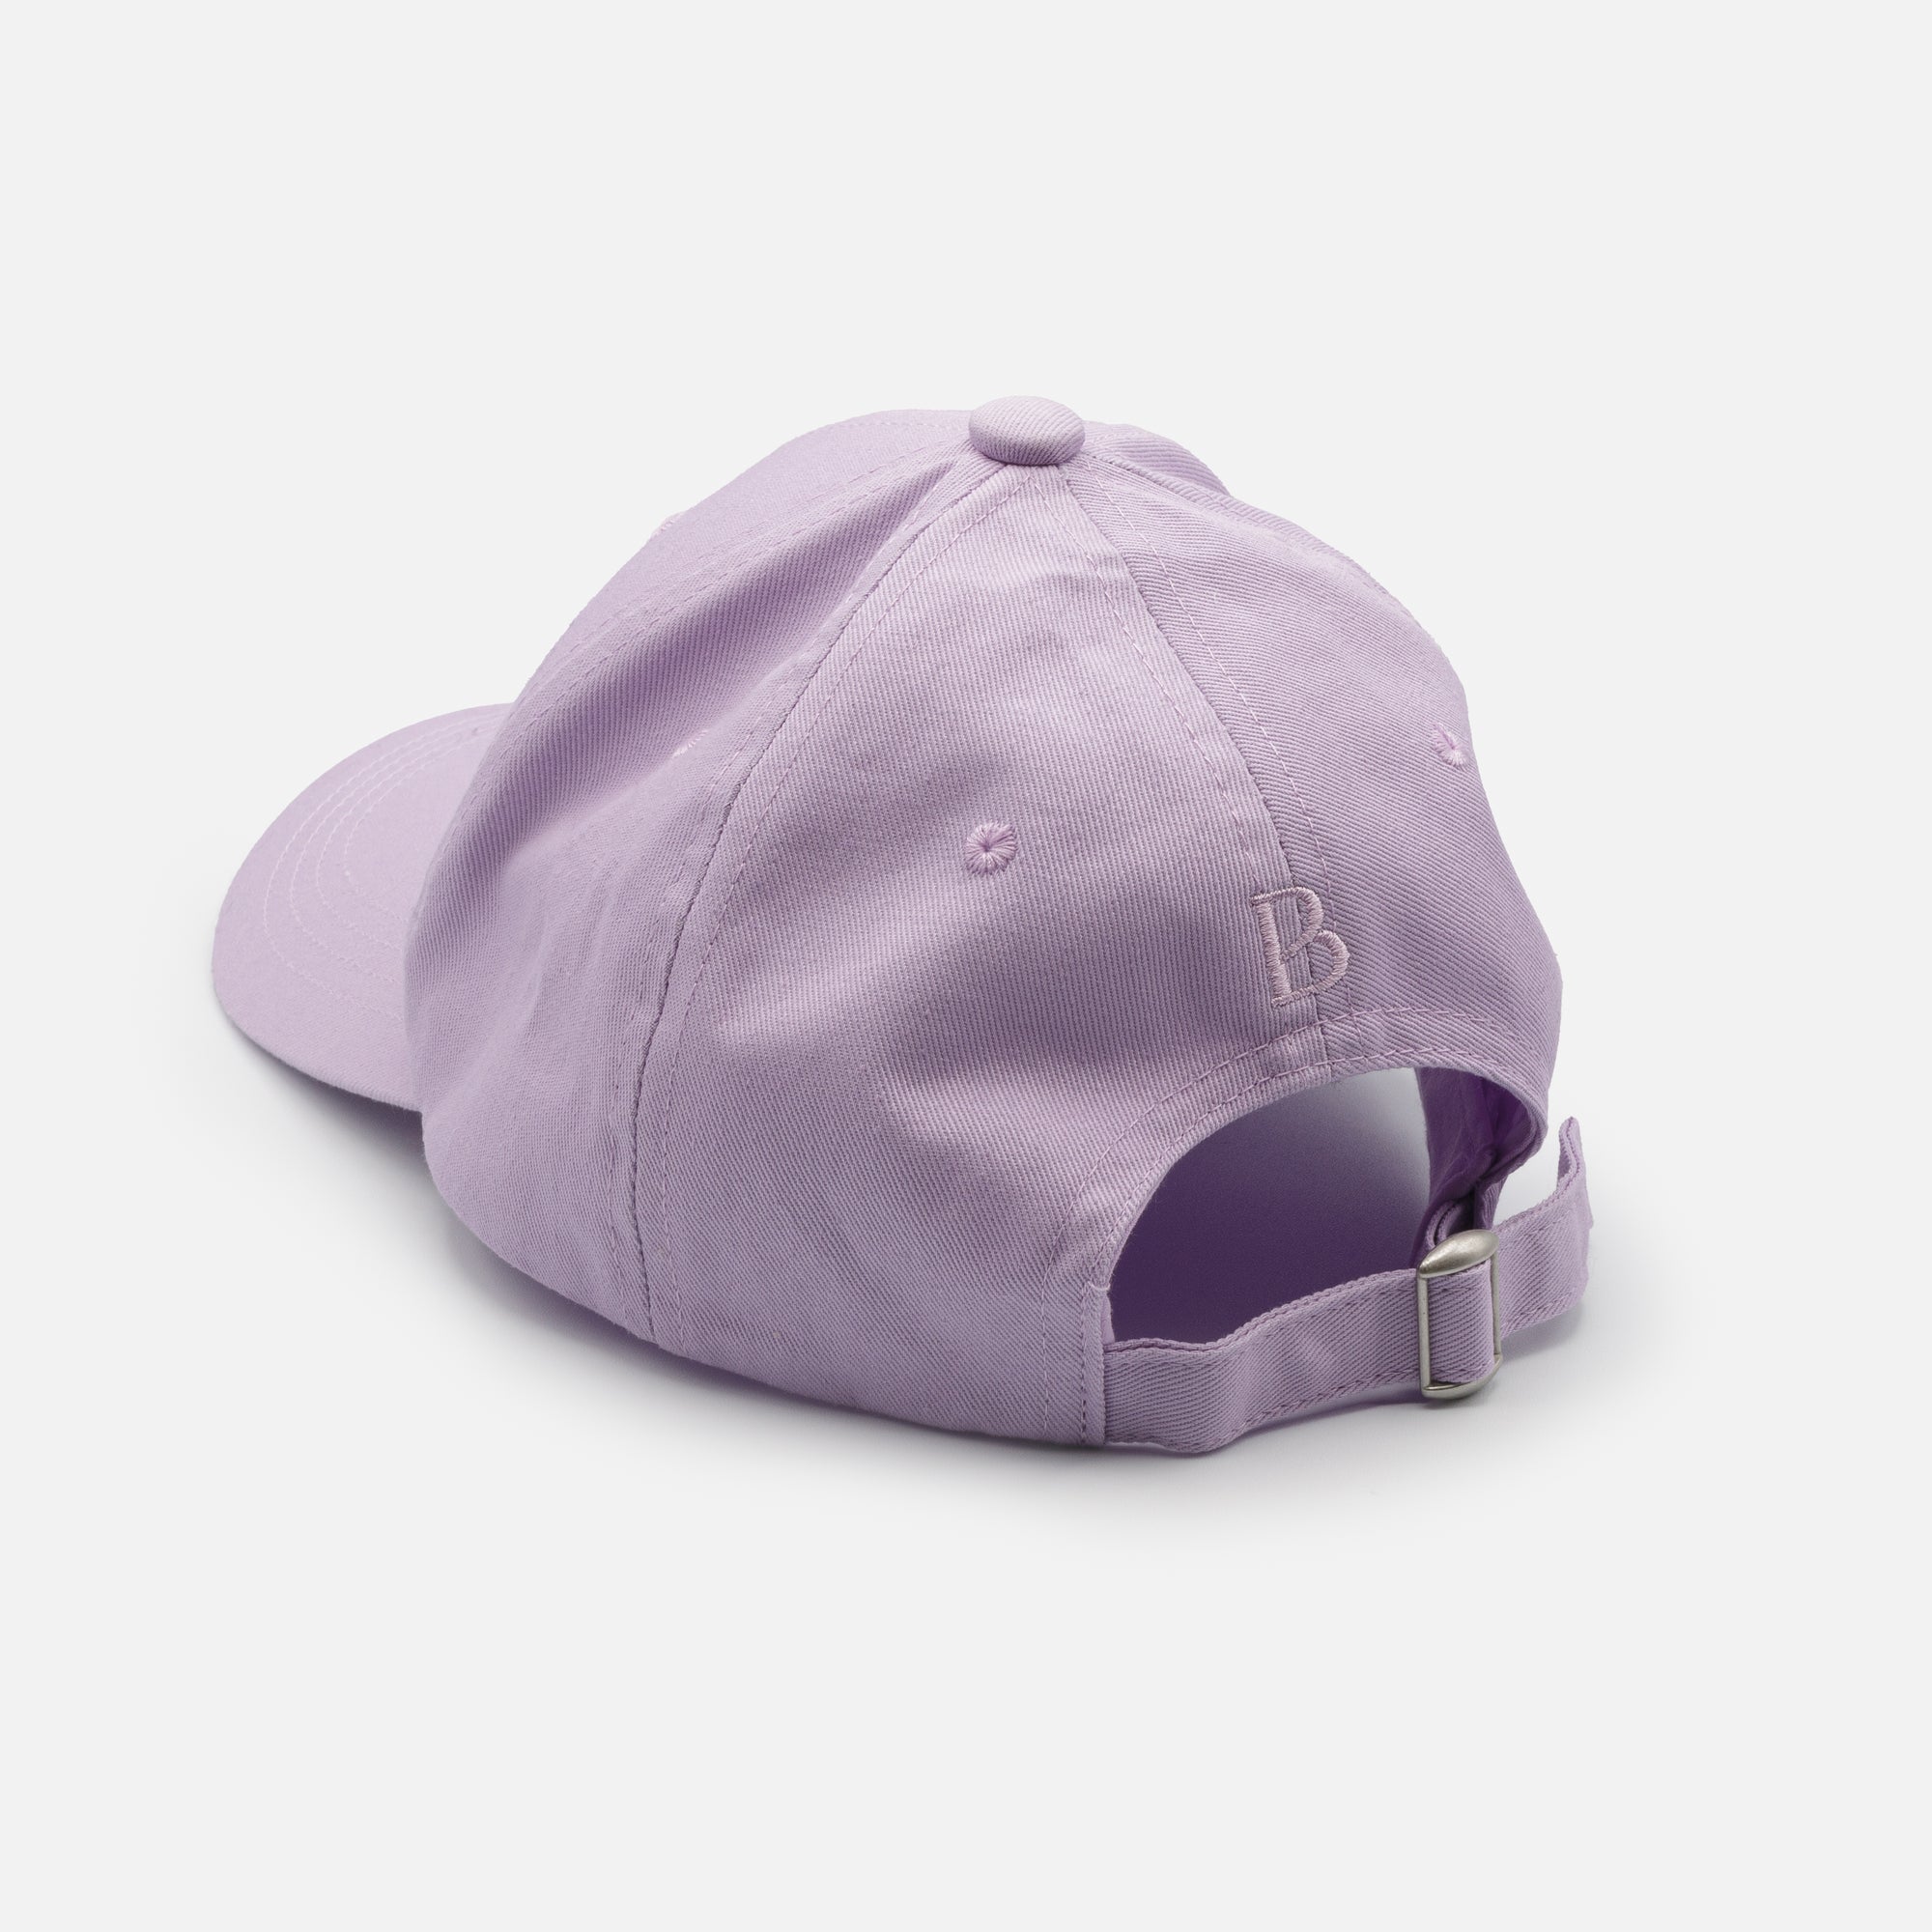 Lilac cap with white butterfly embroidery